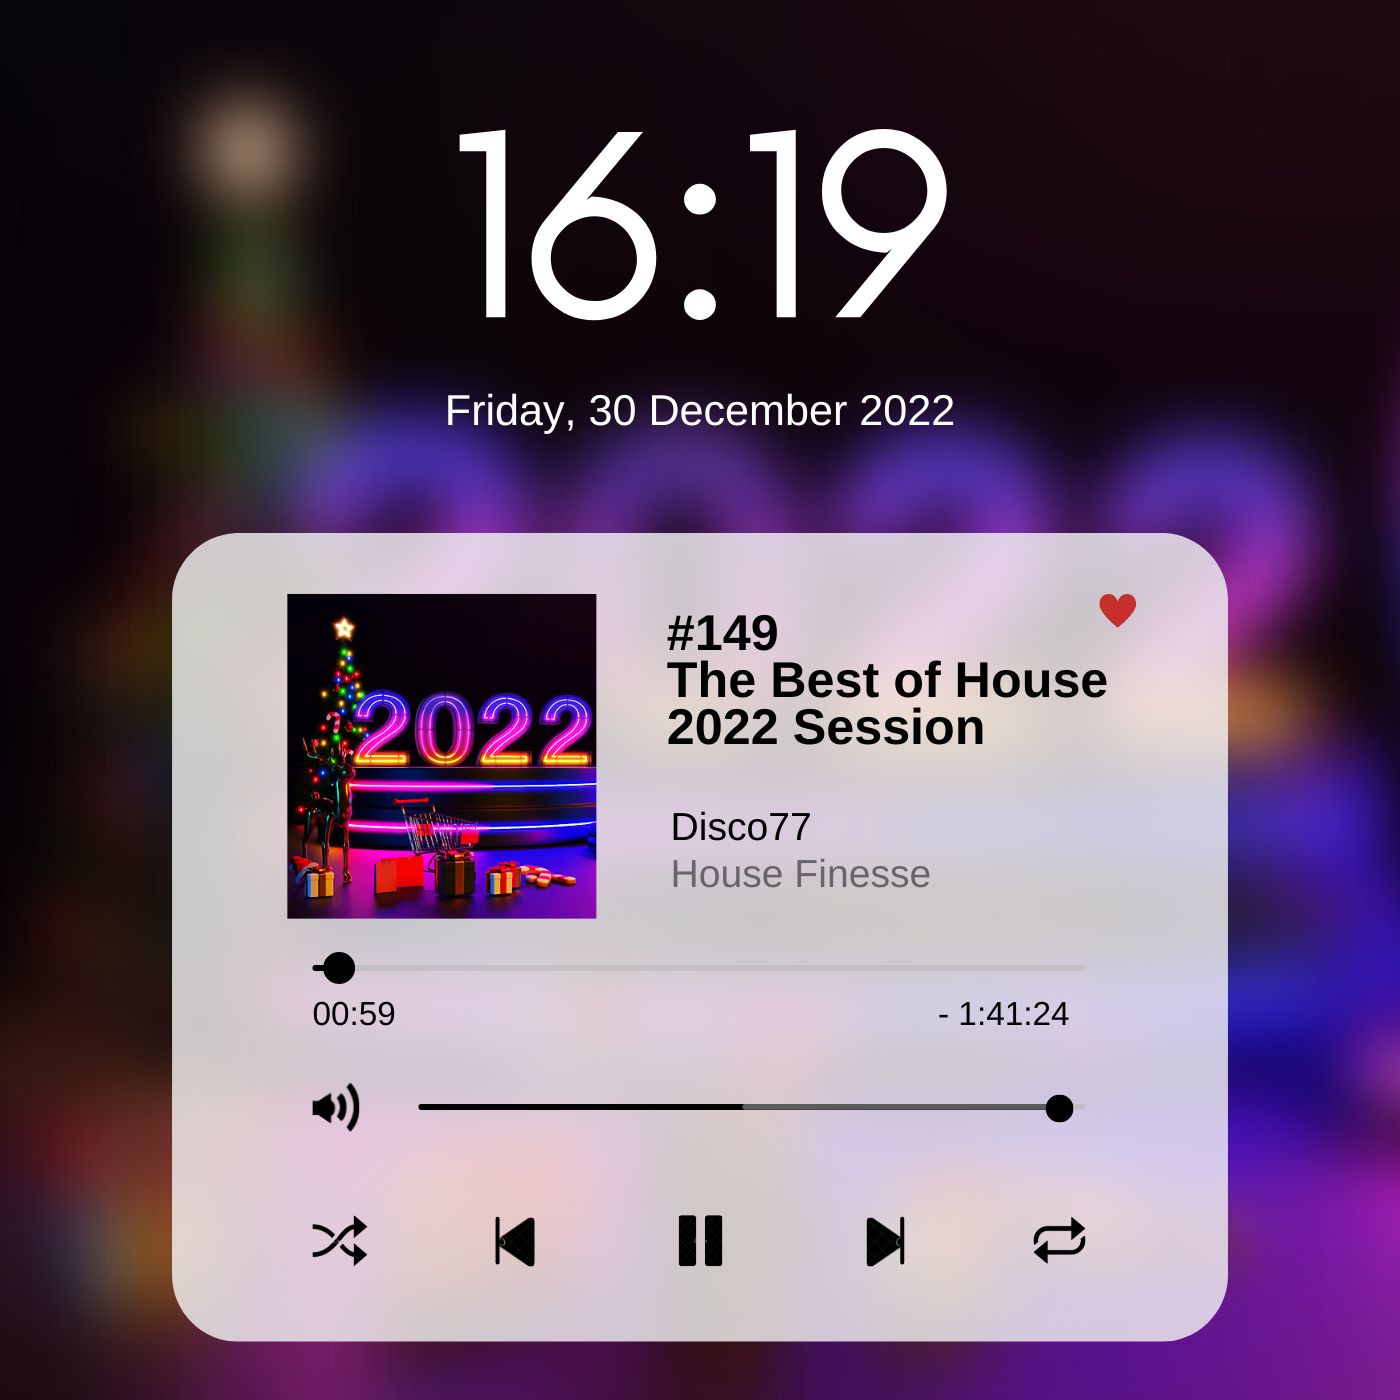 The Best of House 2022 Session with Disco77